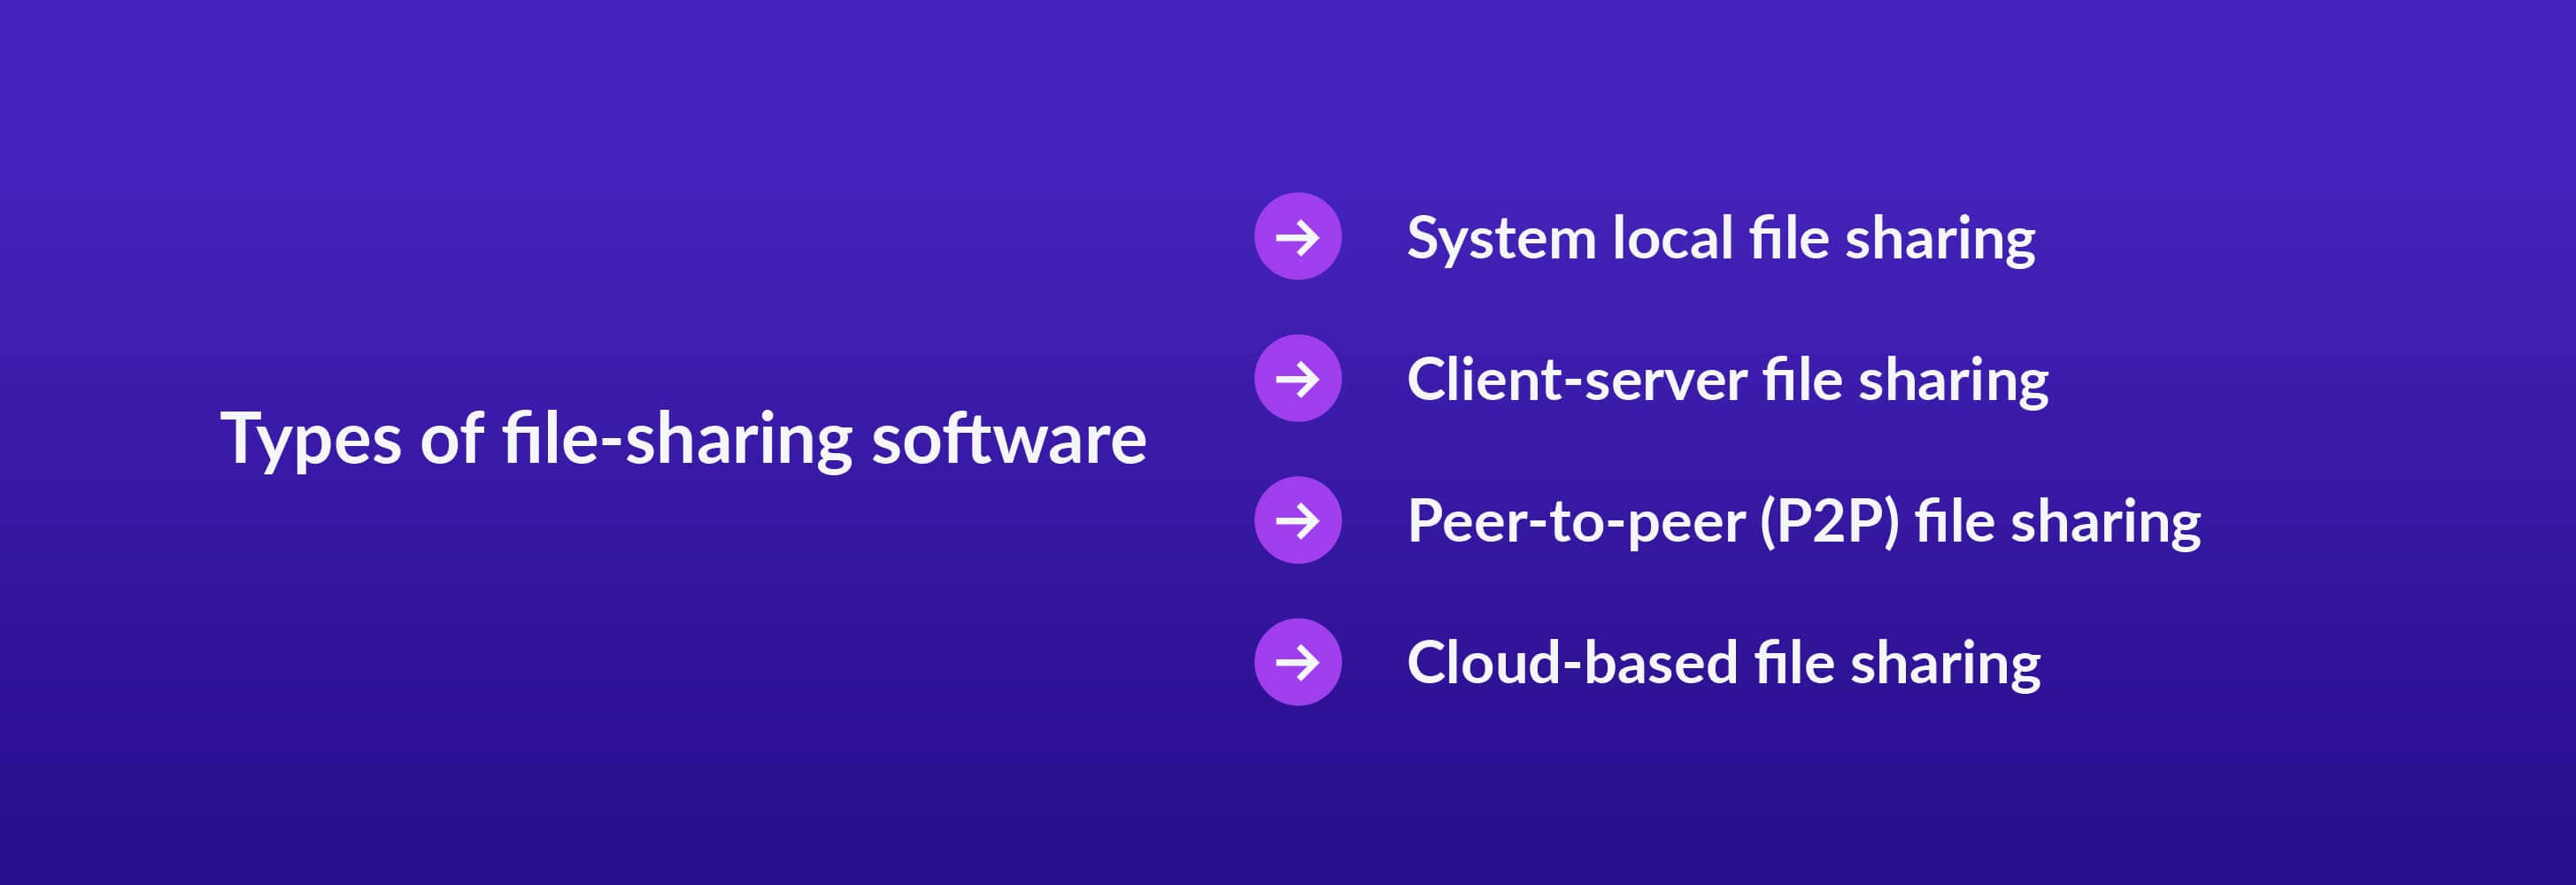 Types of file-sharing software - system local file sharing, client-server file sharing, peer-to-peer (P2P) file sharing, cloud-based file sharing